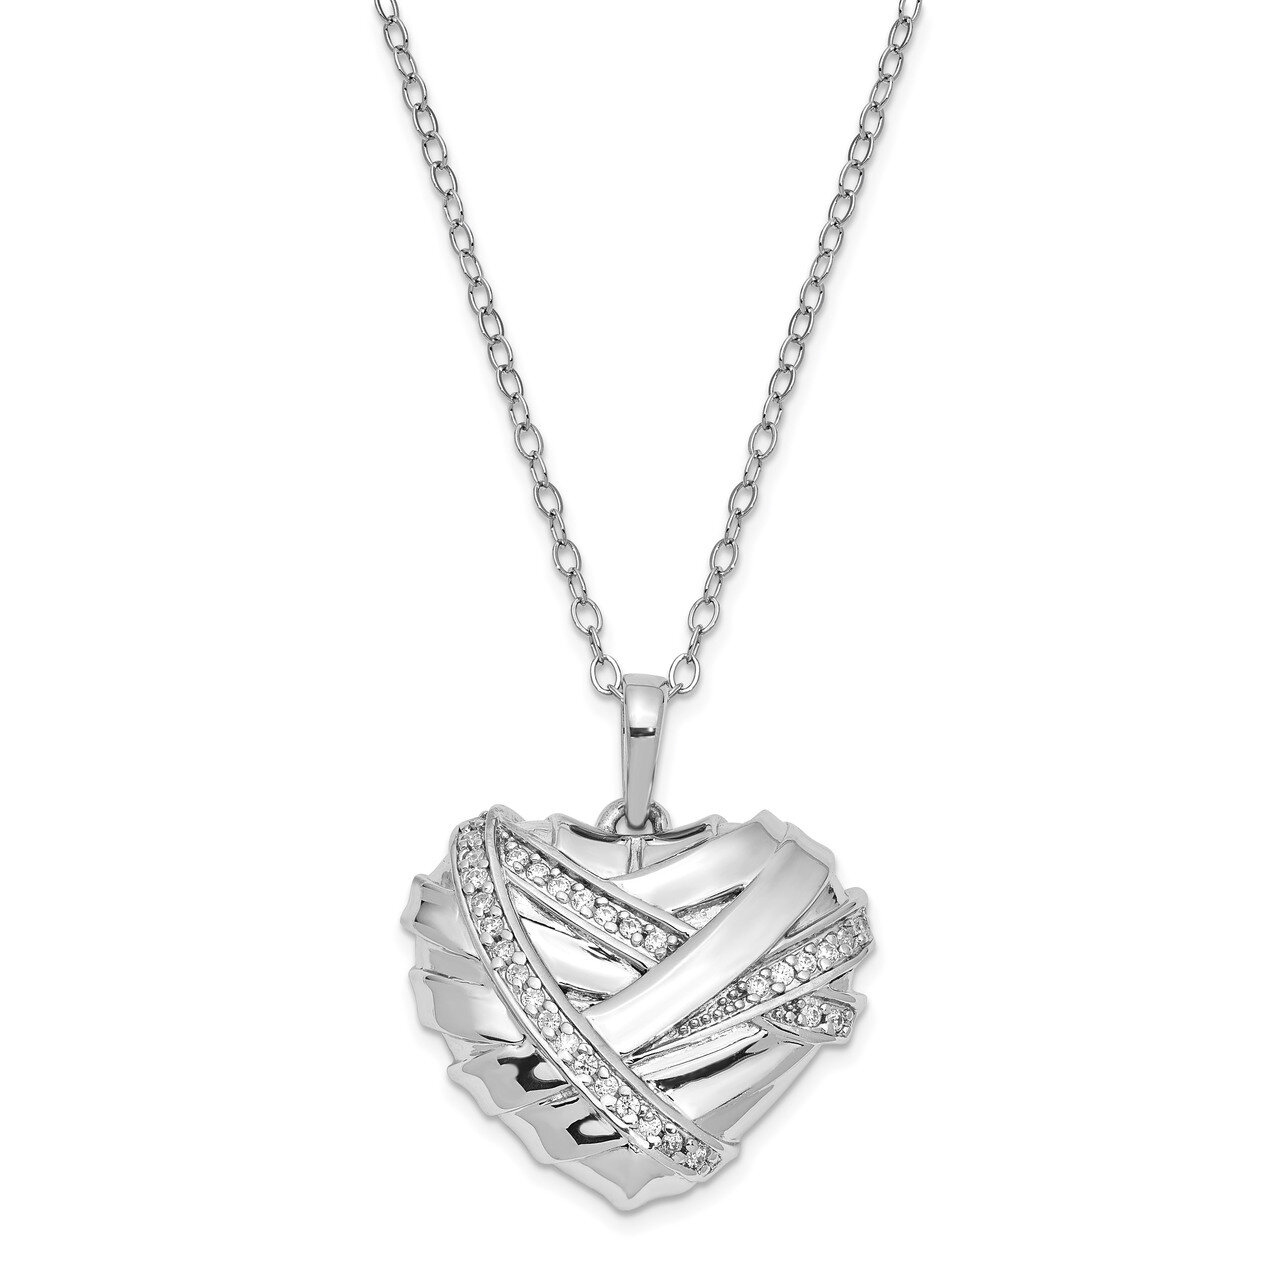 Bandaged Heart Ash Holder 18 Inch Necklace Sterling Silver CZ Diamond QSX709